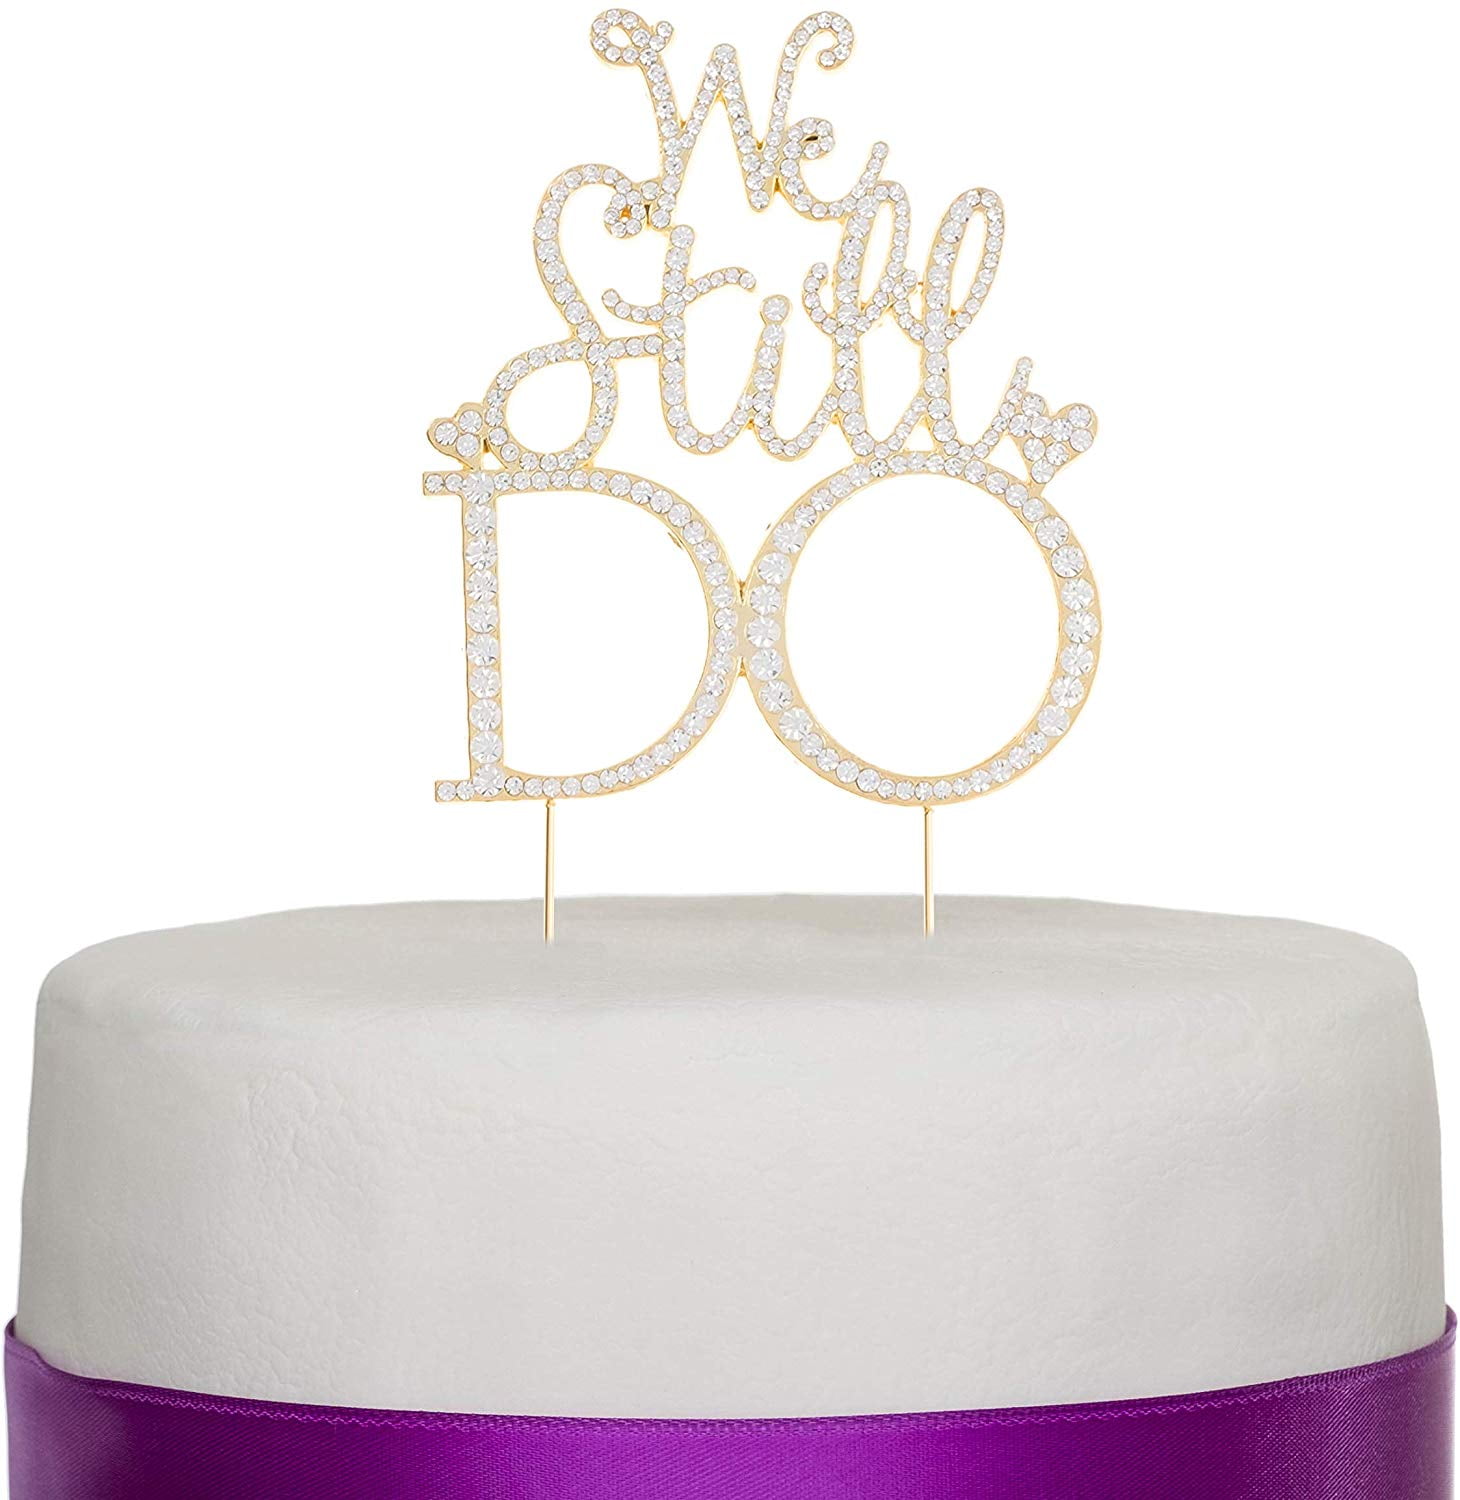 Details about   We Still Do Cake Topper Anniversary Party Decoration Vow Renewal 